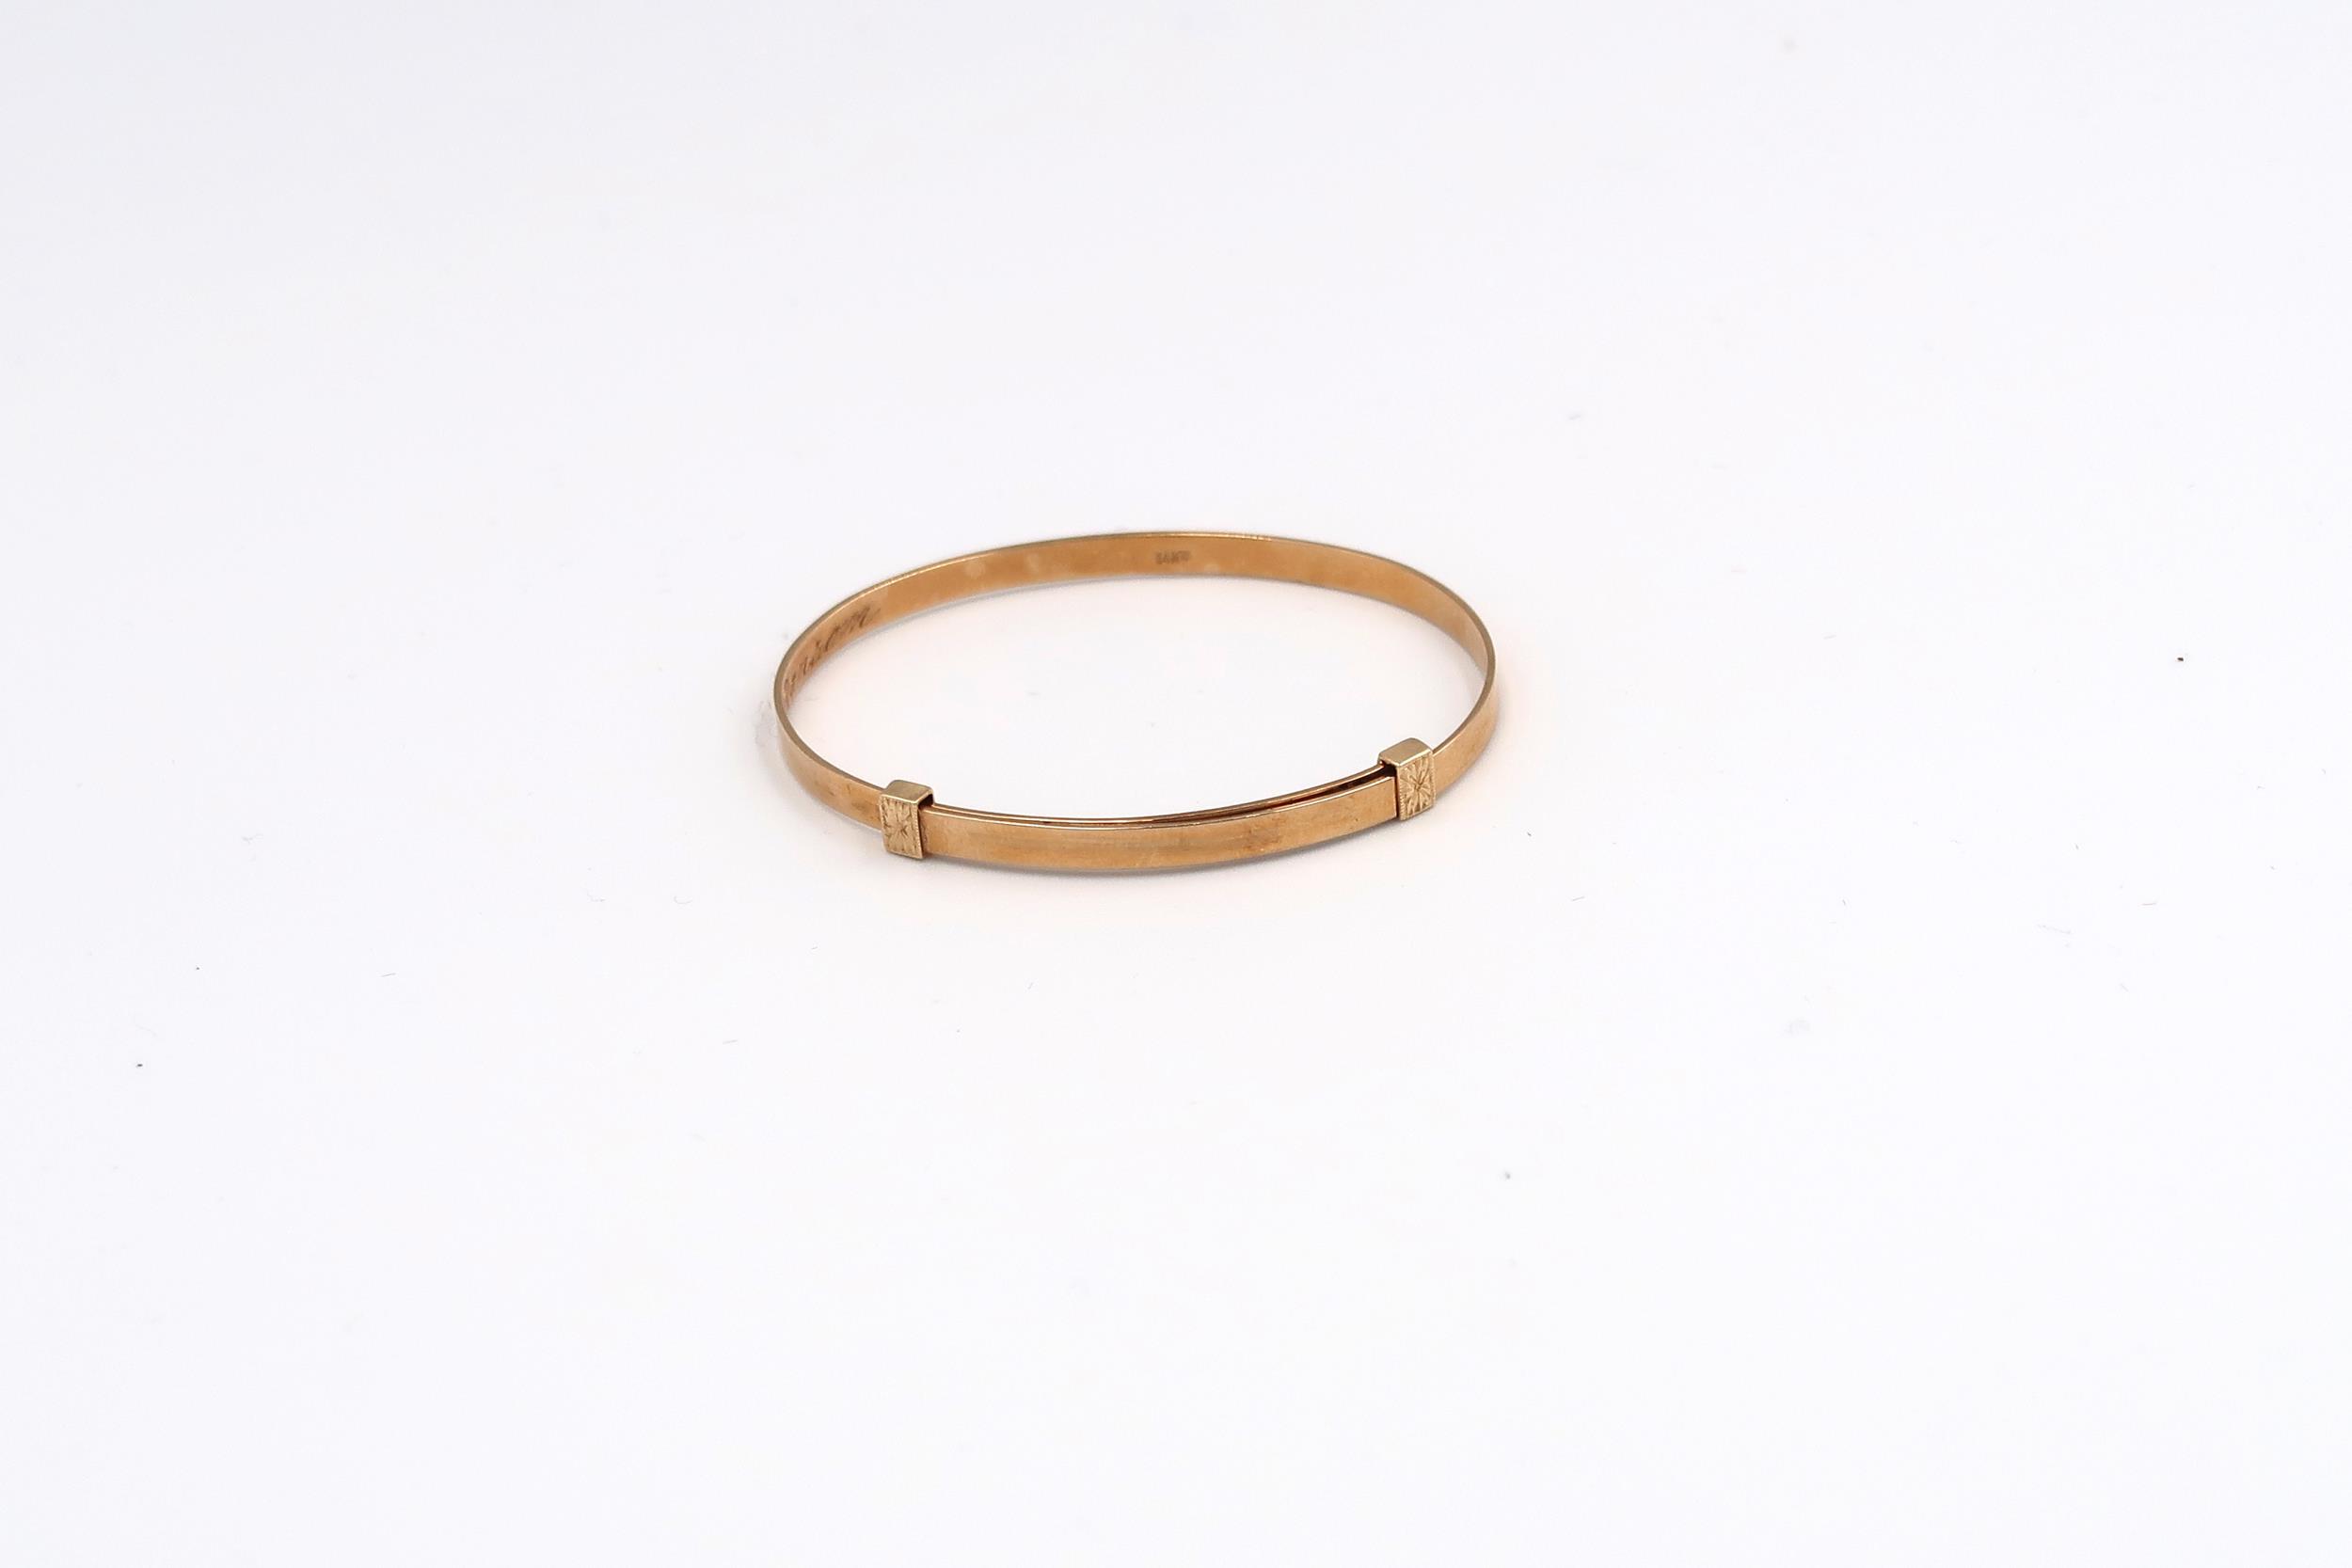 A child's adjustable bangle. Stamped 14K. Weight 4.29 grams.